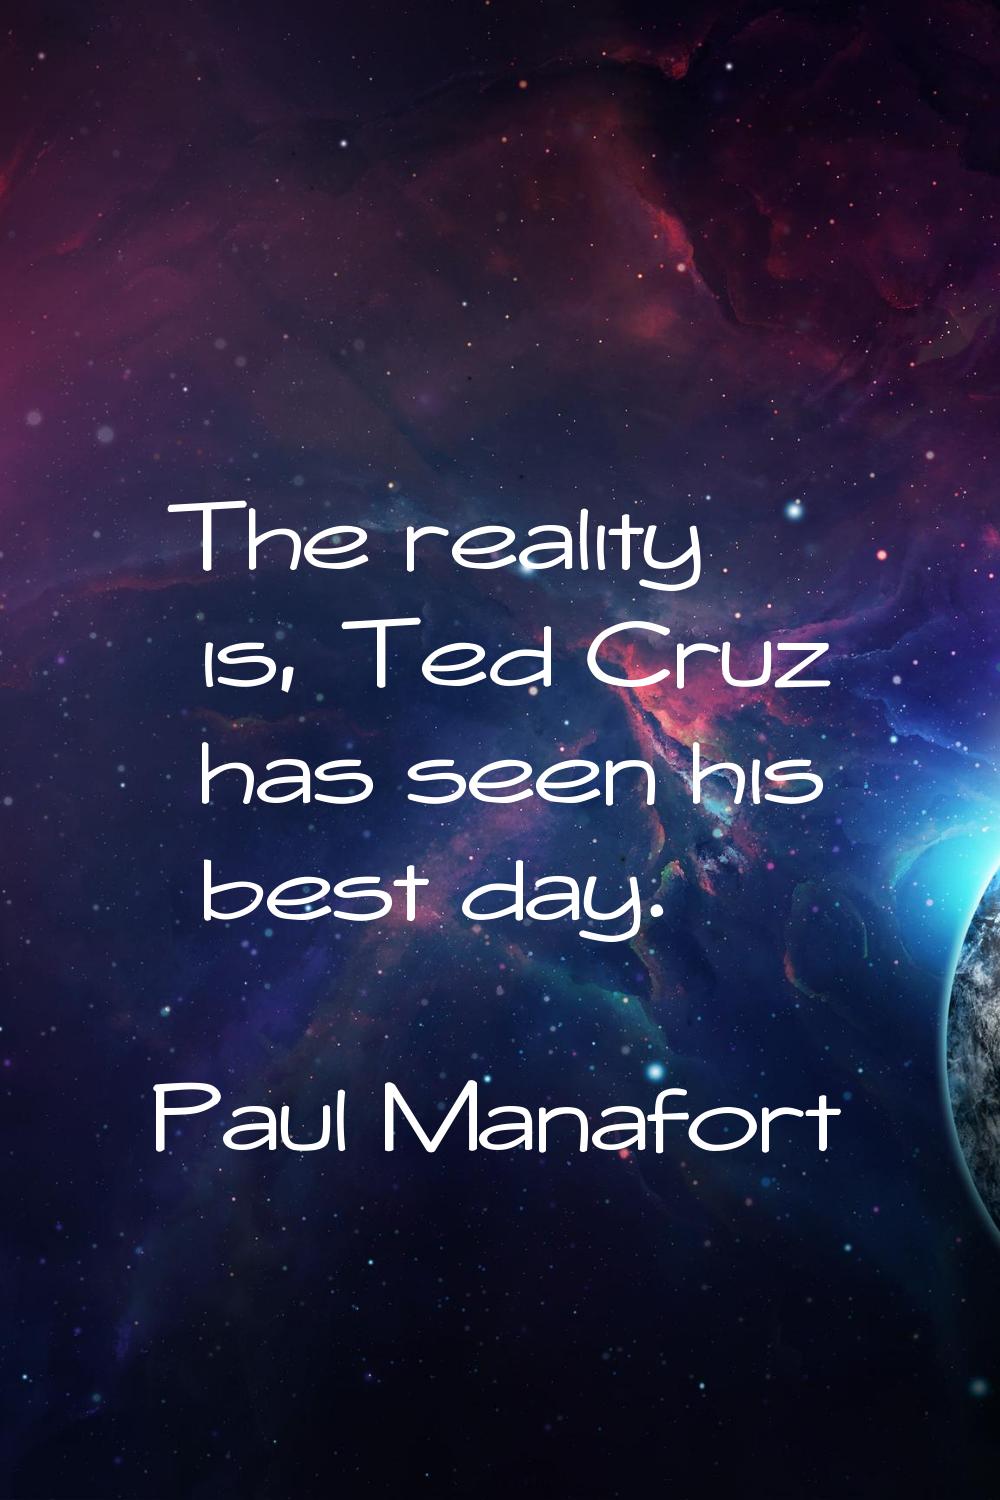 The reality is, Ted Cruz has seen his best day.